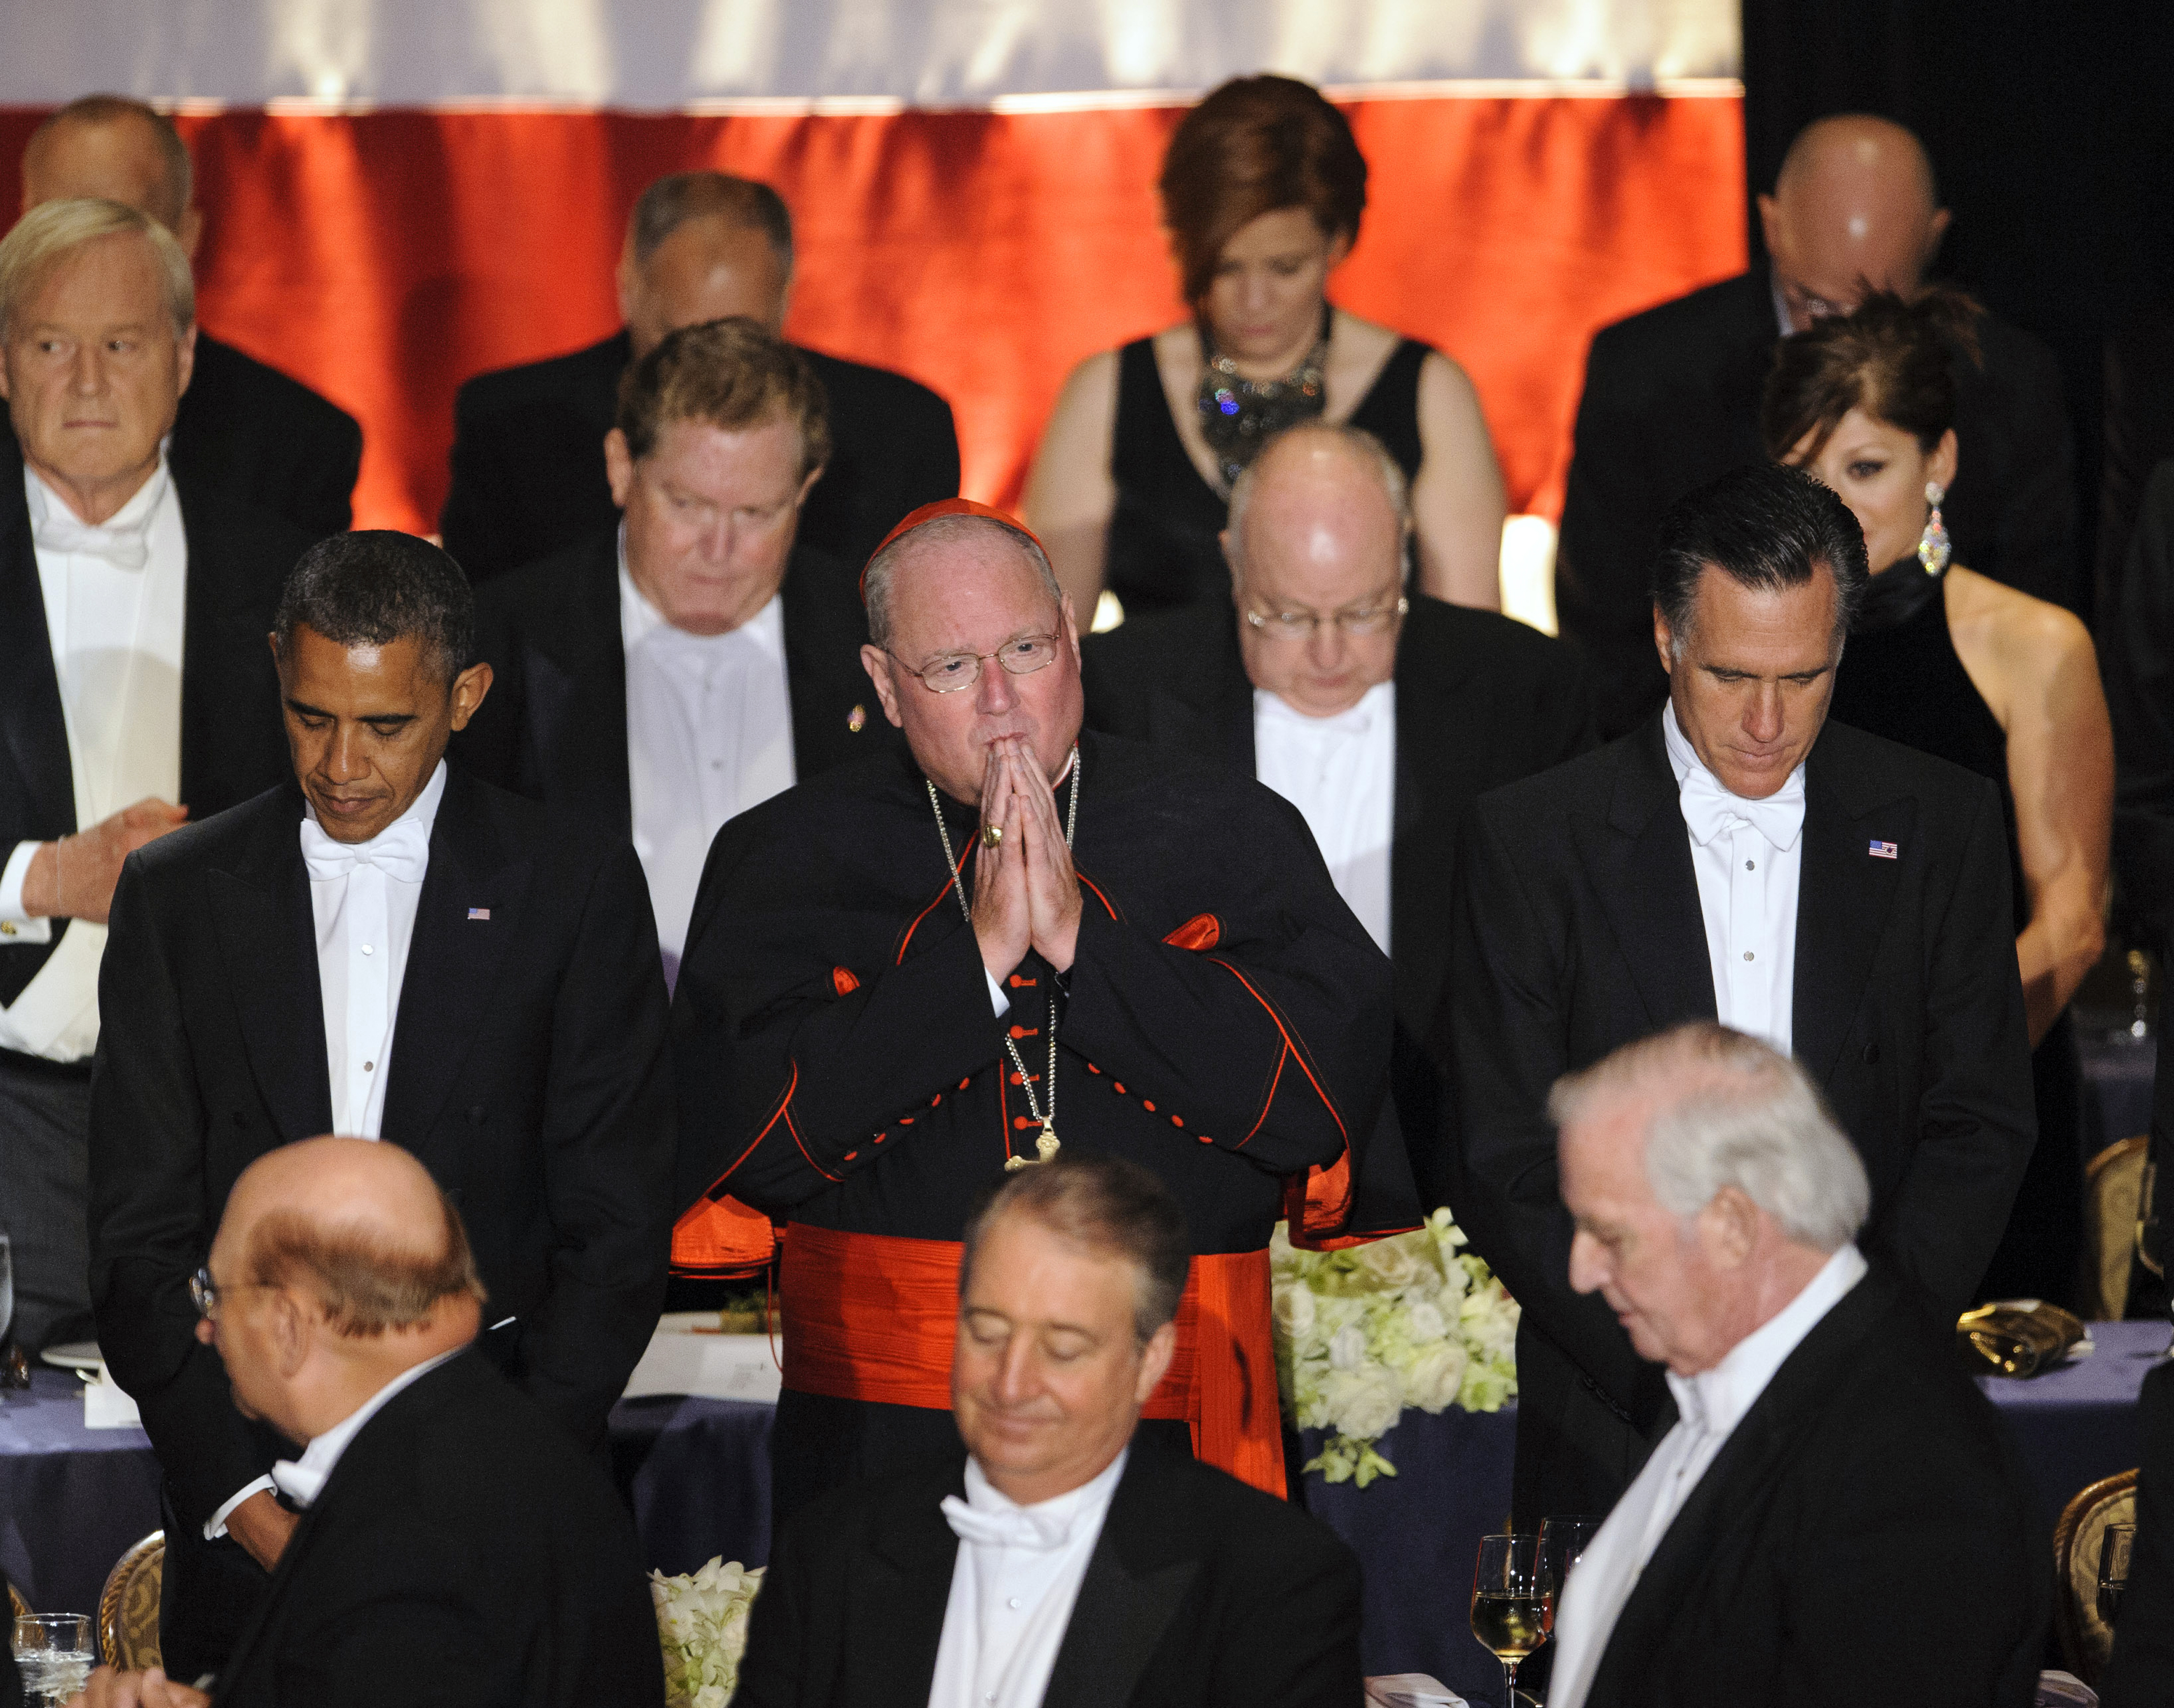 President Barack Obama, Cardinal Timothy Dolan, Archbishop of New York, and Republican presidential candidate Mitt Romney pray during the 67th Annual Alfred E. Smith Memorial Foundation Dinner at the Waldorf Astoria Hotel in New York. (New York Daily News&mdash;NY Daily News via Getty Images)